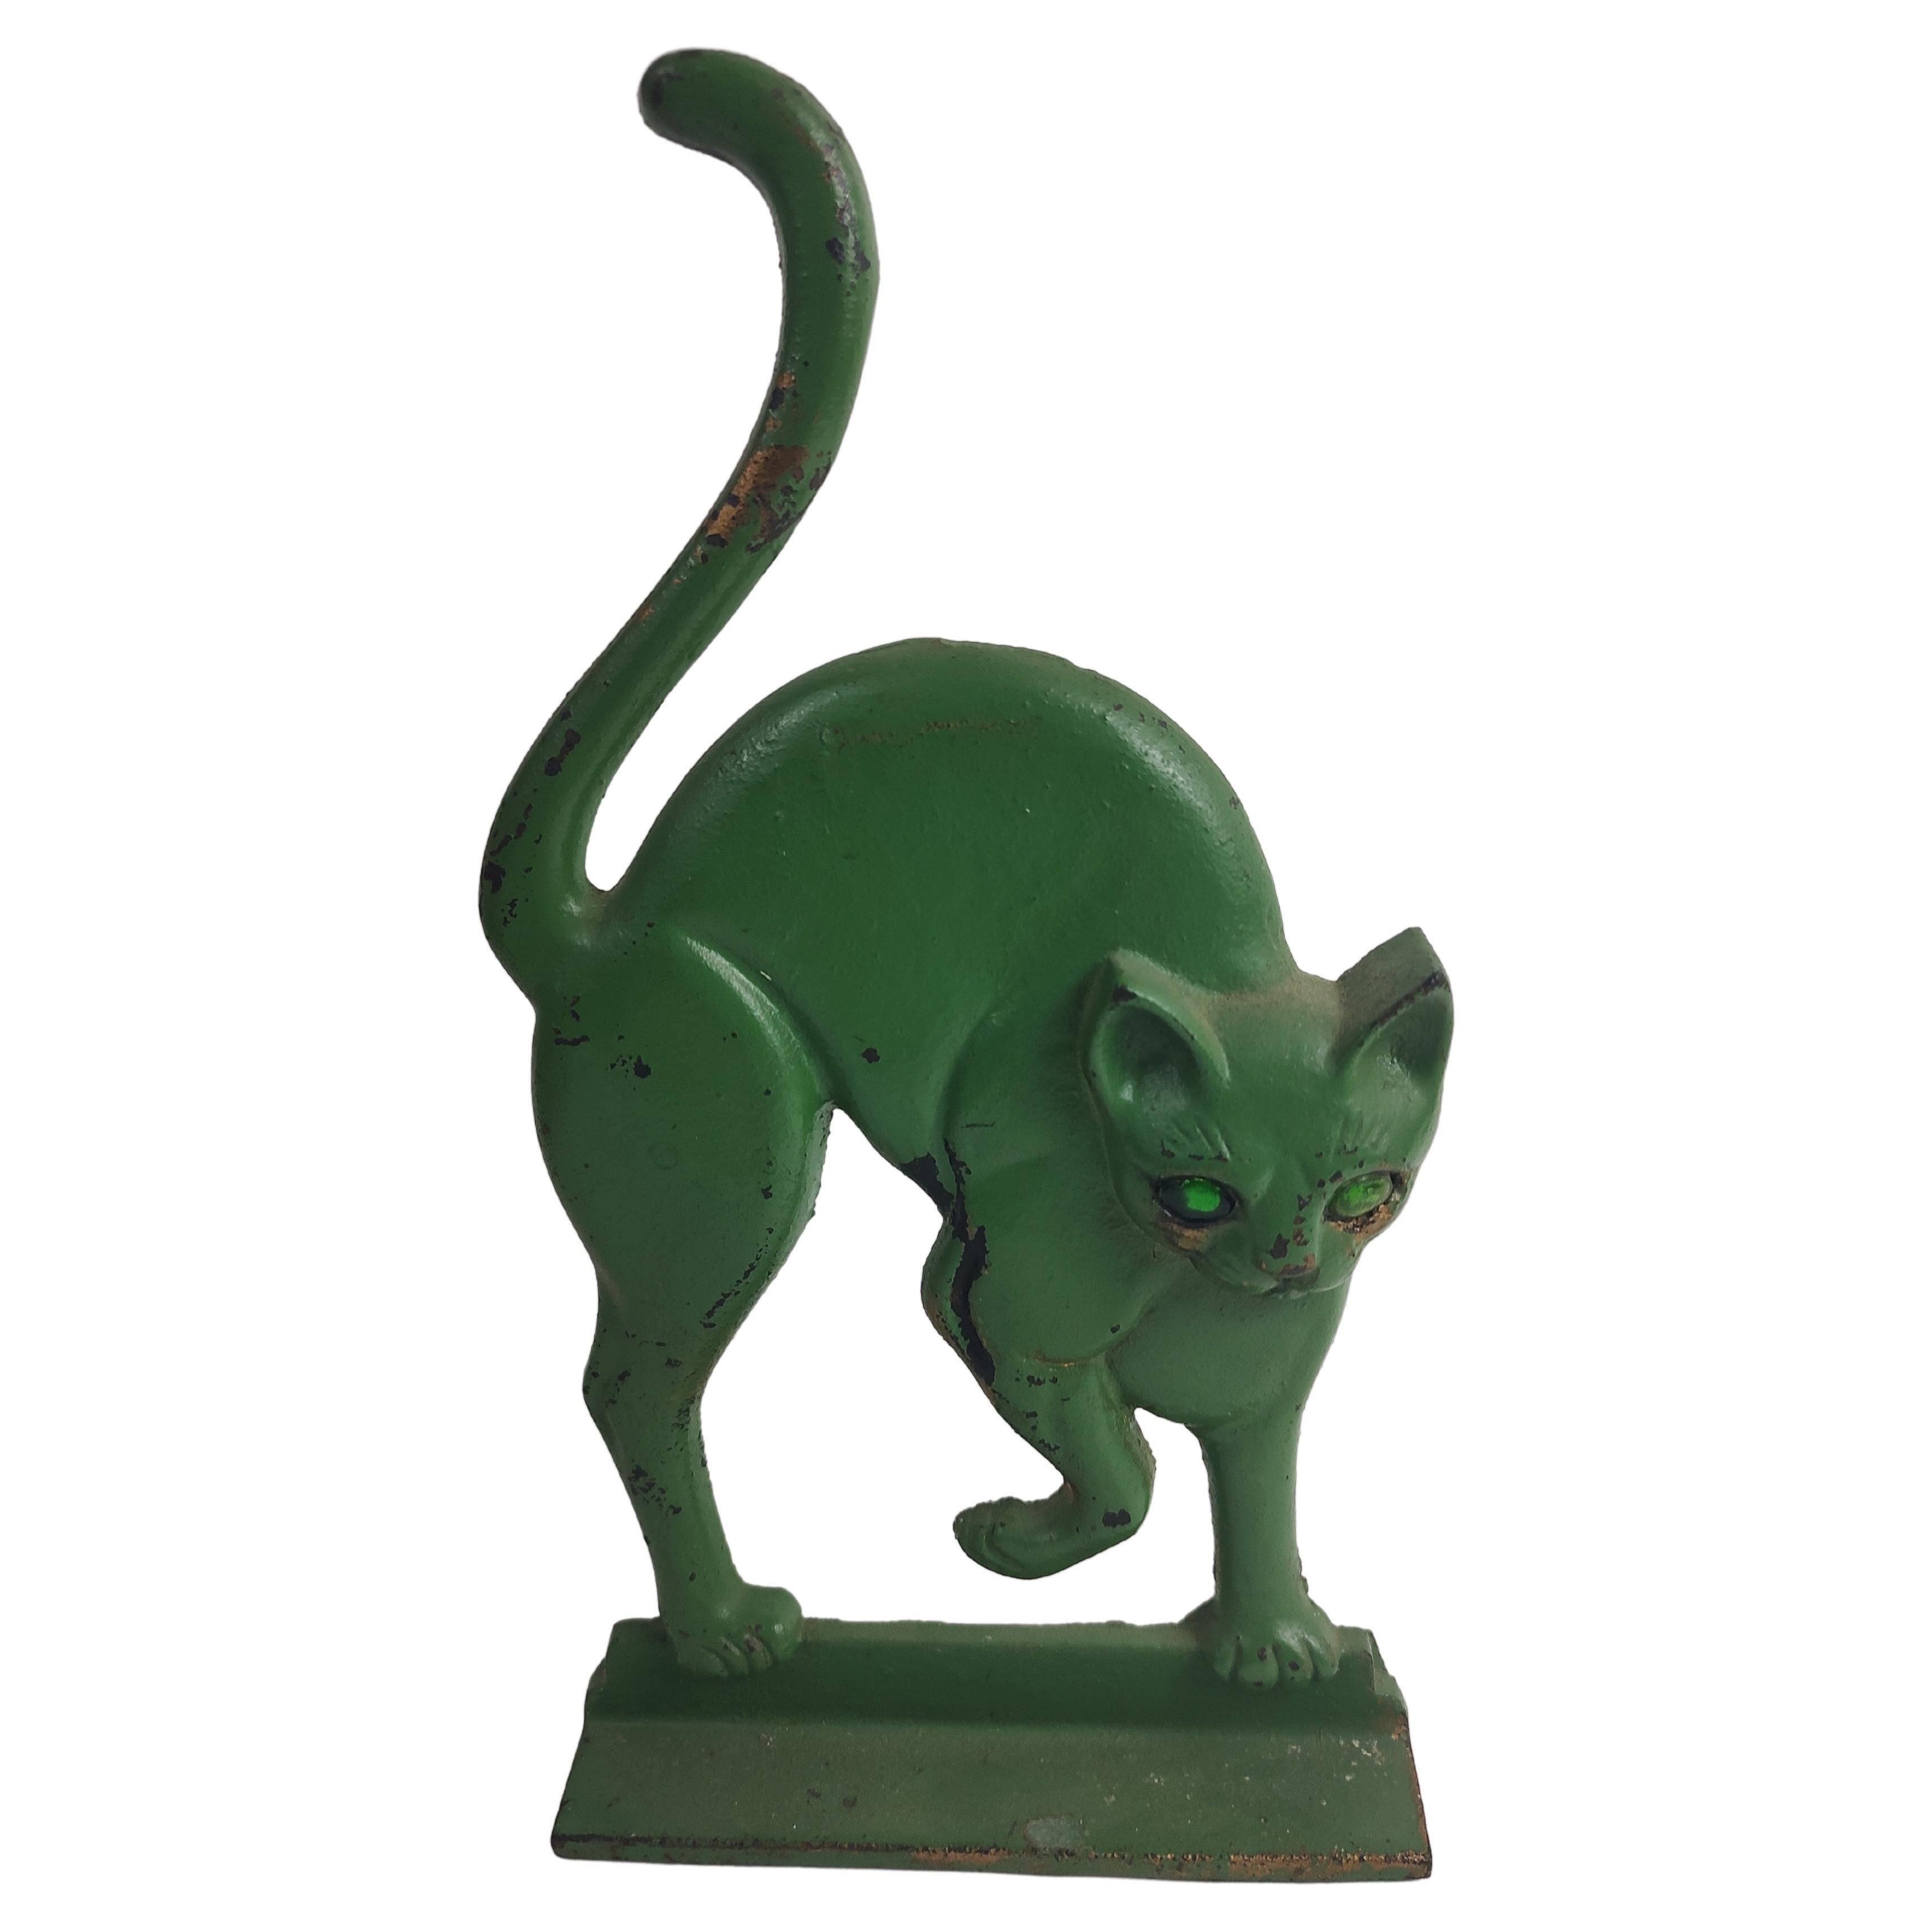 Midcentury Arched Cat with Glass Eyes Doorstop in Old Green Paint